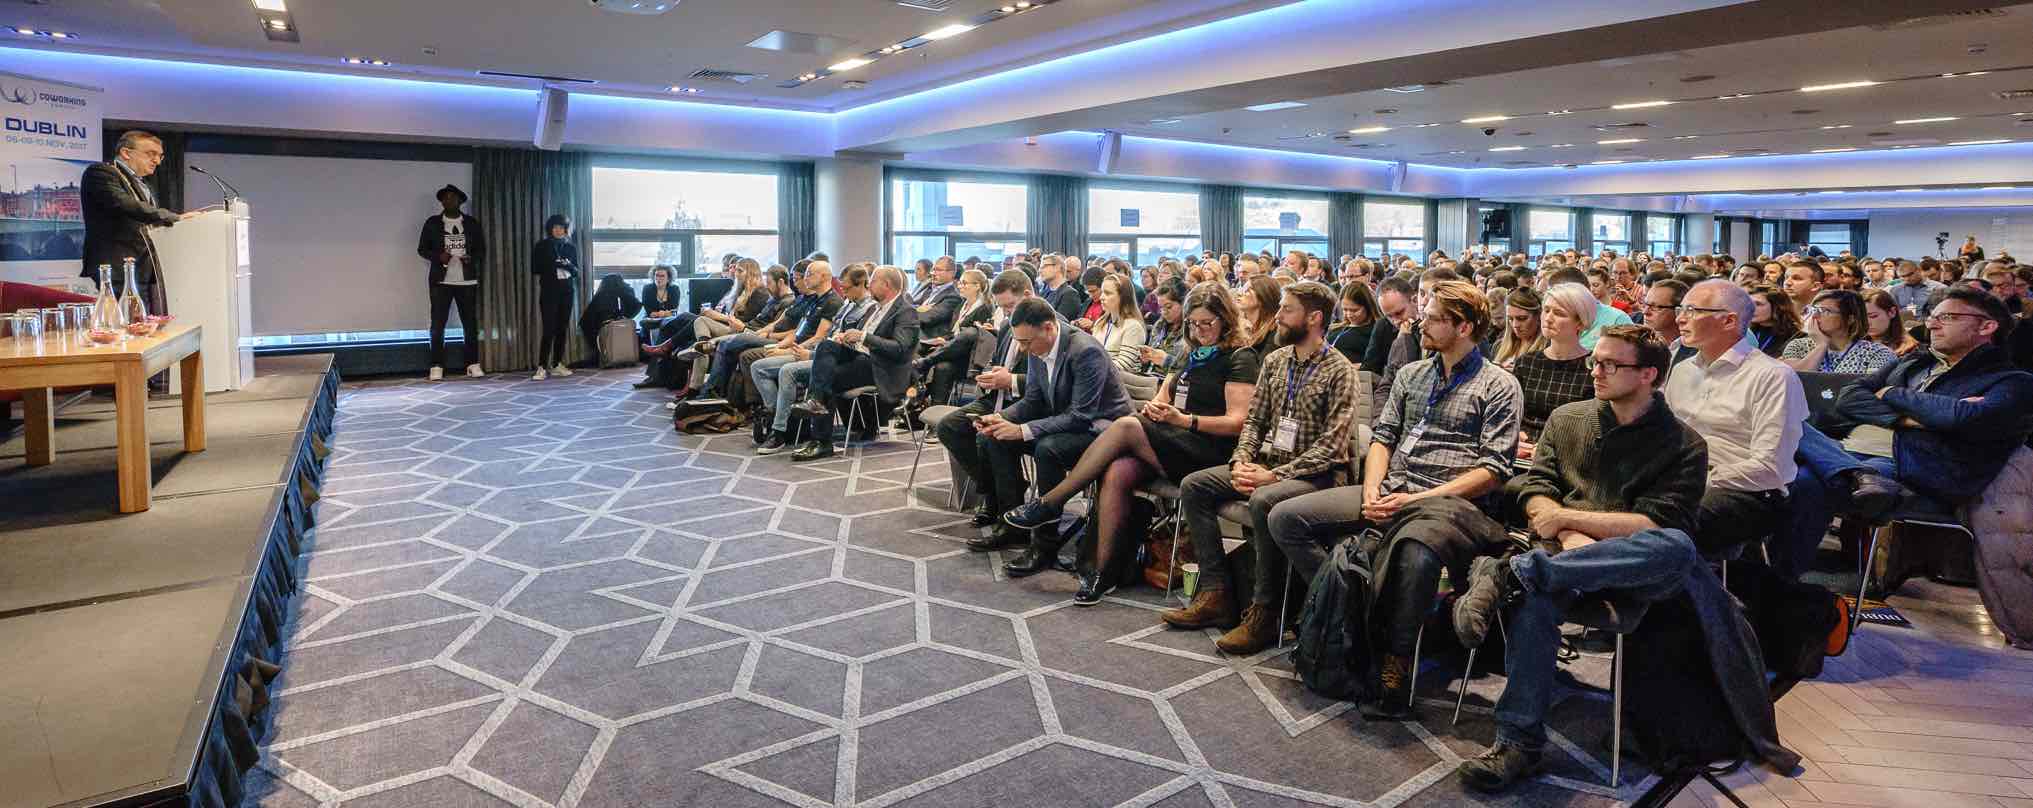 Coworking Europe 2020 In Review: Panel Appearances, Standout Sessions, Live Streaming Booths and More